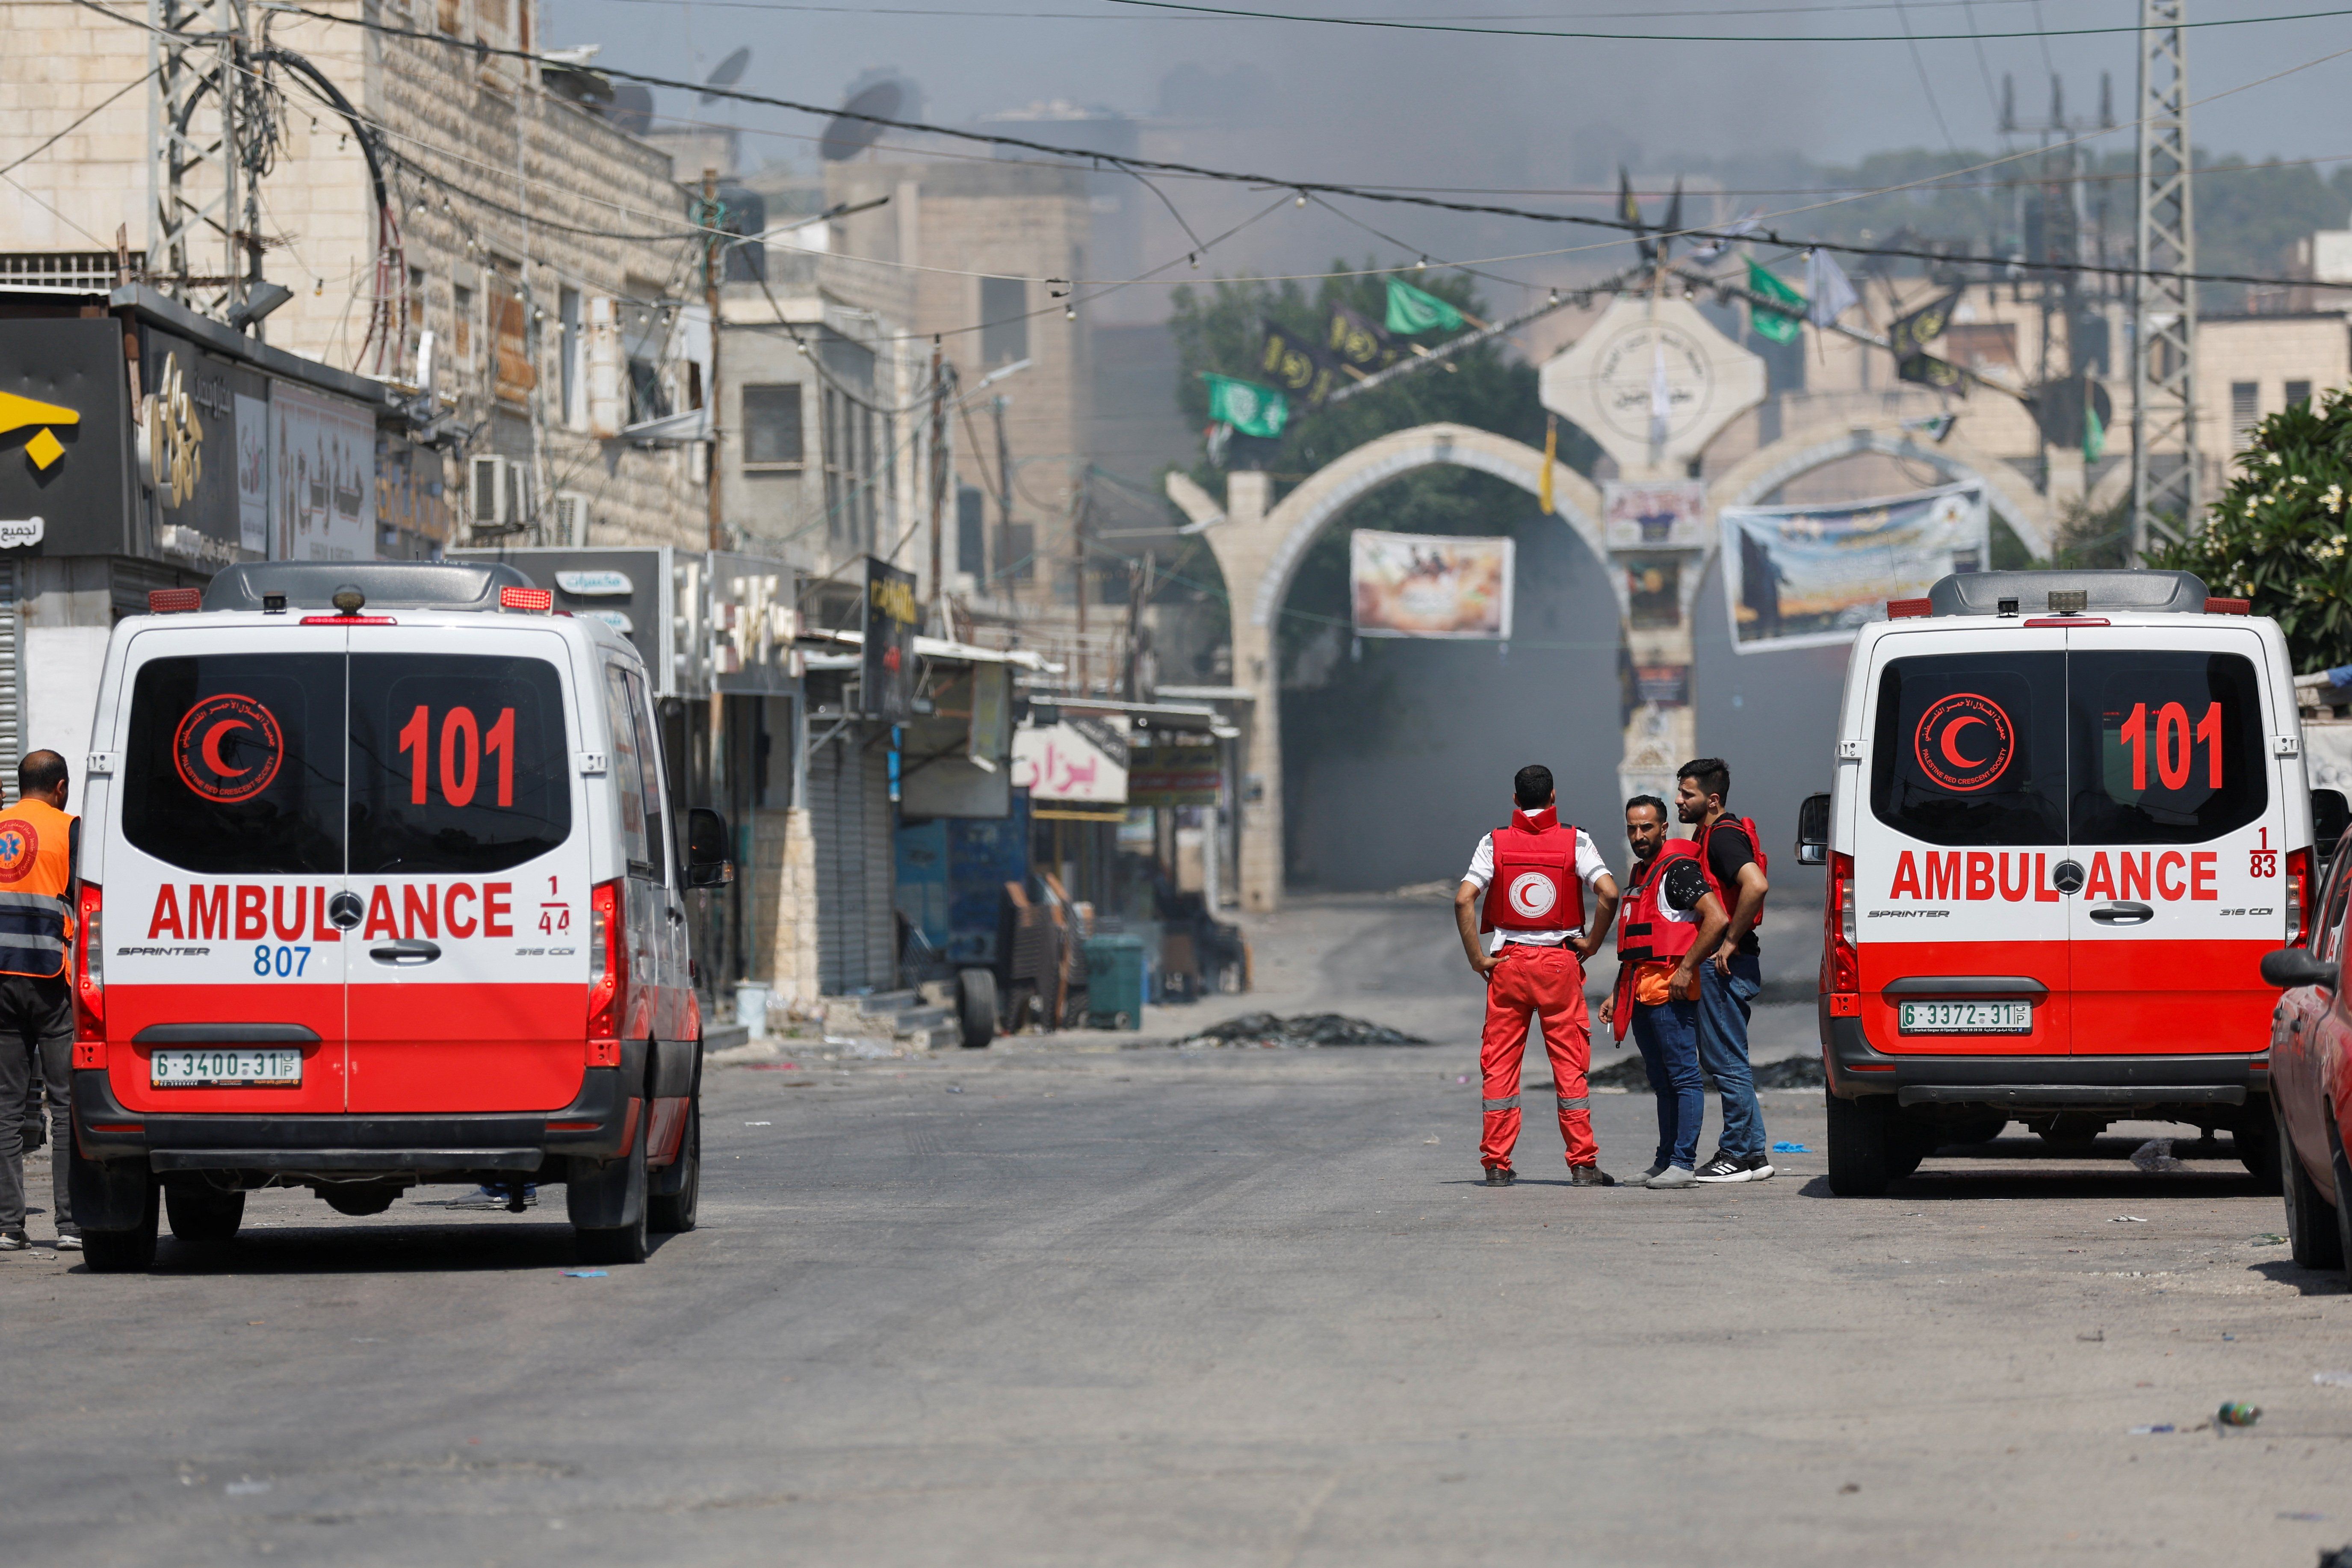 Palestinian medics stand by as smoke rises during an Israeli military operation in Jenin.